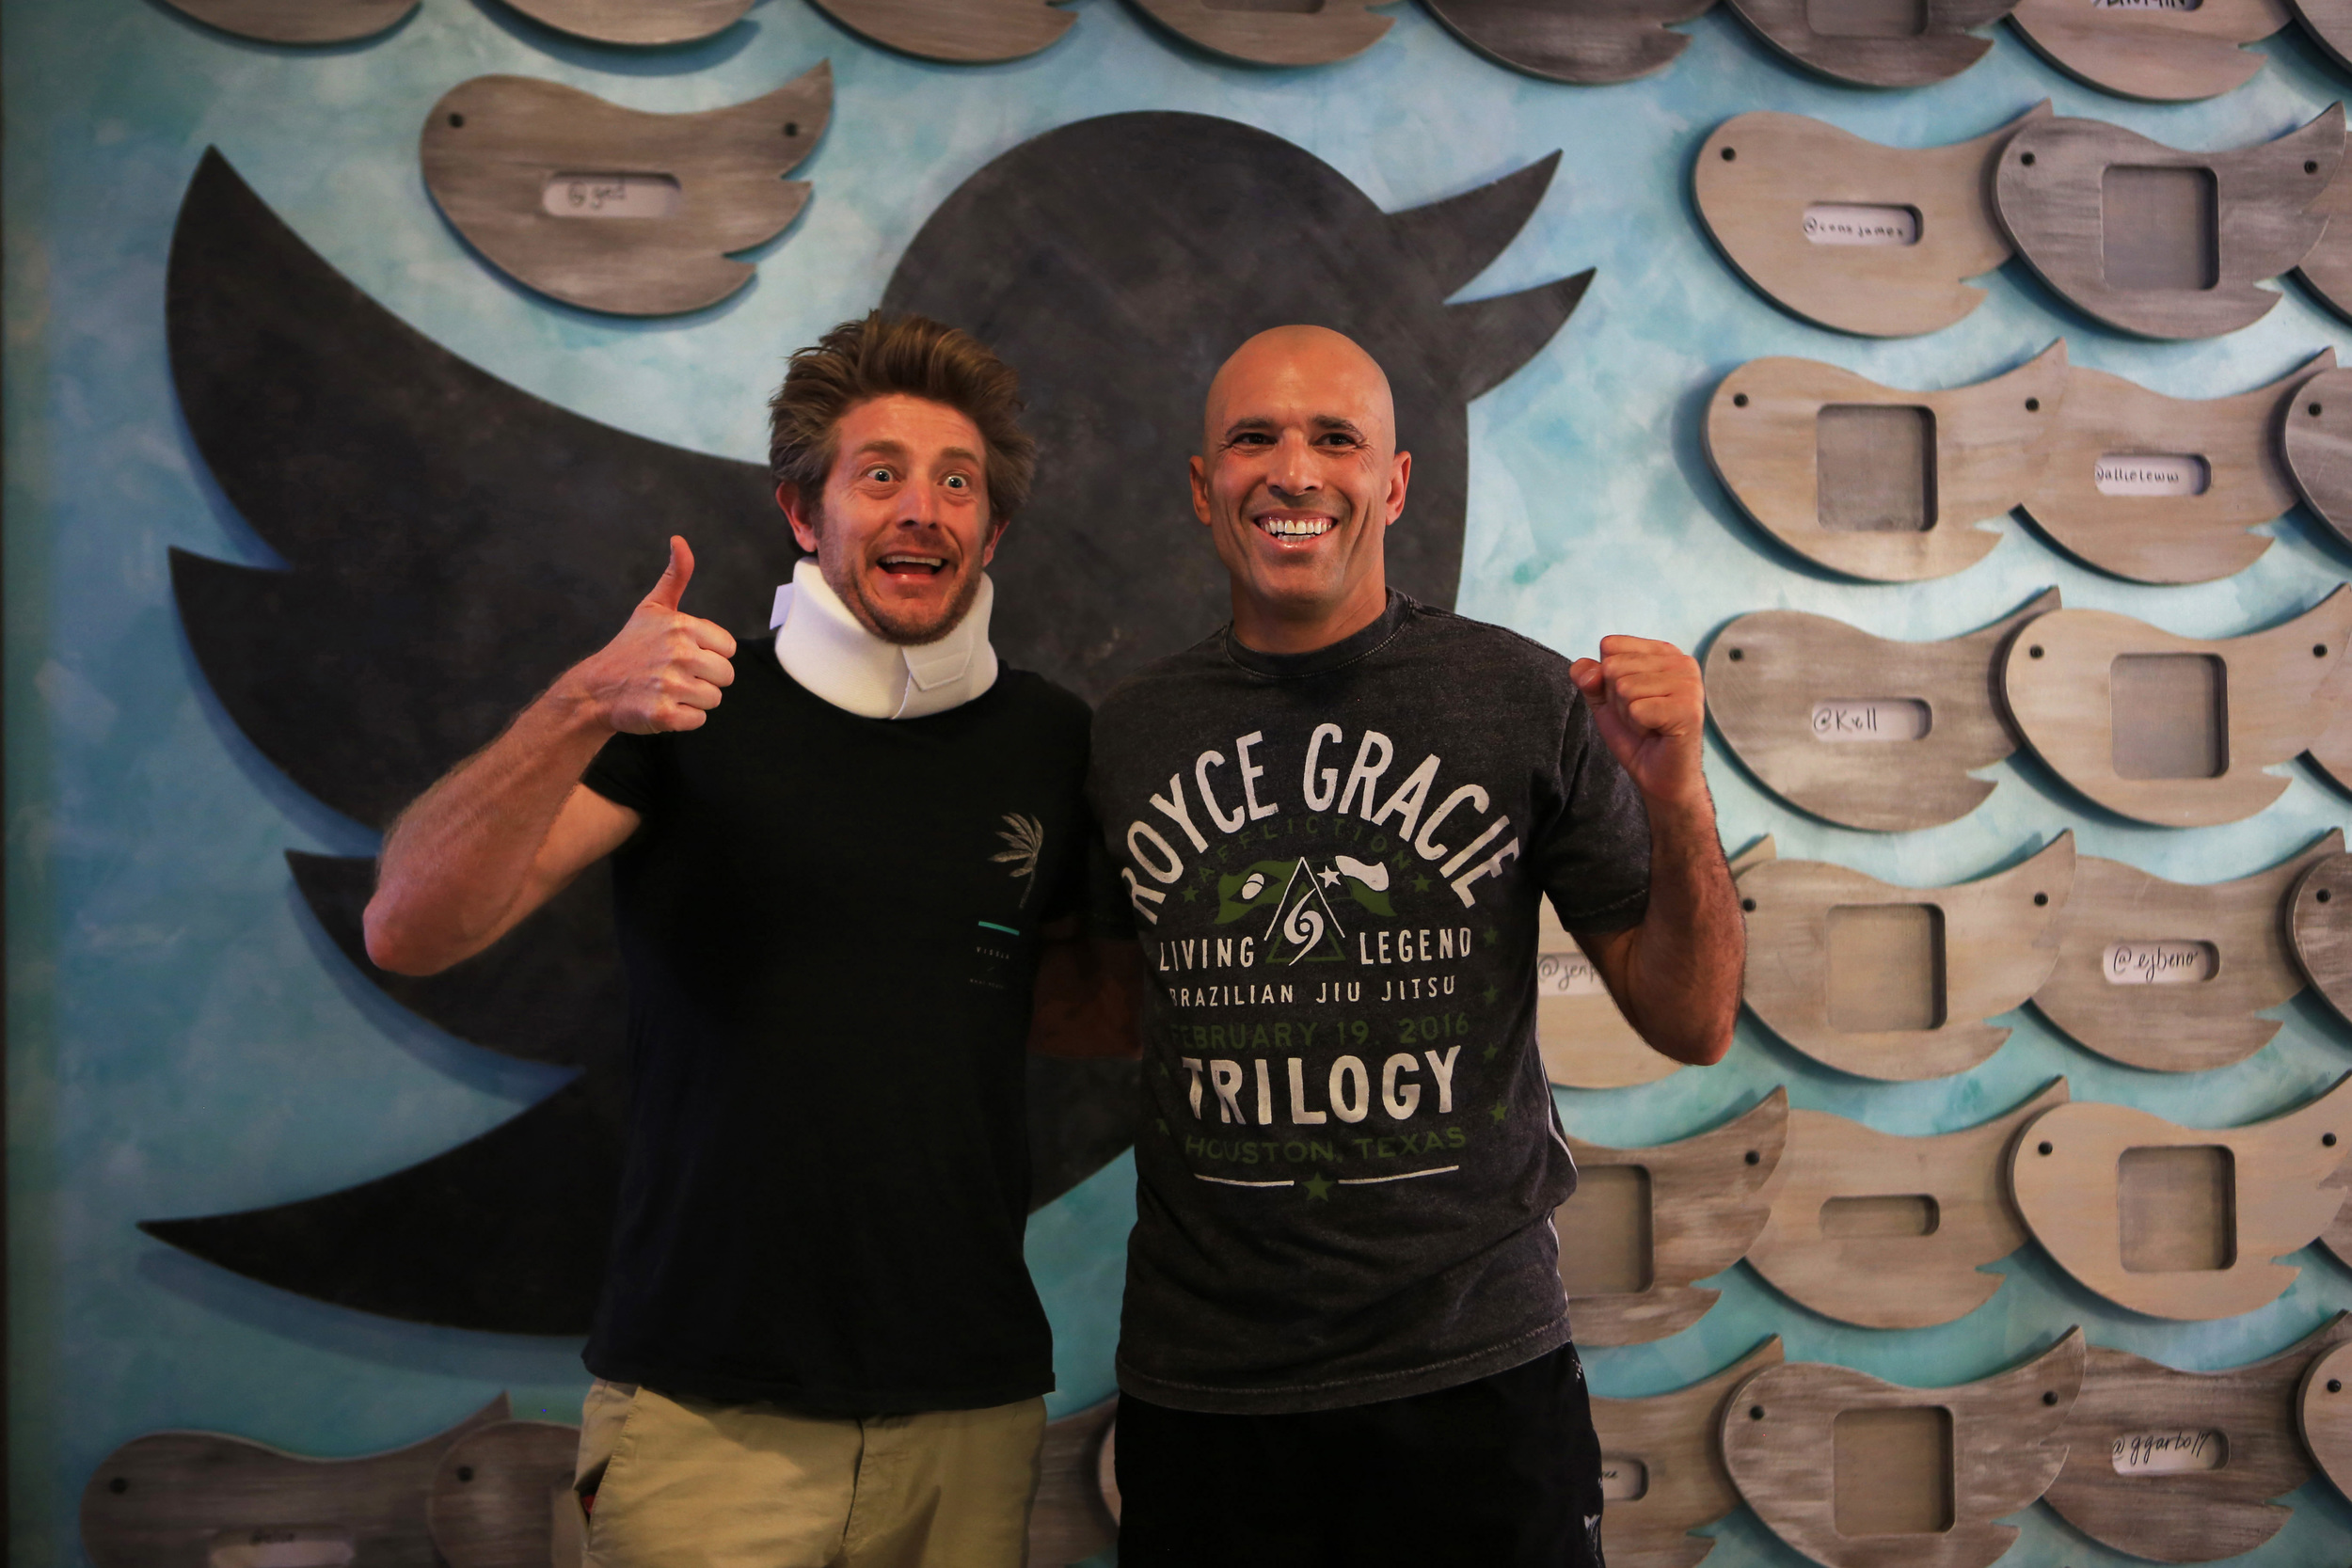  Jason Nash, left, internet filmmaker, writer and Vine phenomenon, stands with Gracie, right, mixed martial artist for Bellator MMA at Twitter, during their iPhone video shoot at Twitter in Santa Monica, CA. (©Gail Fisher for ESPN) 